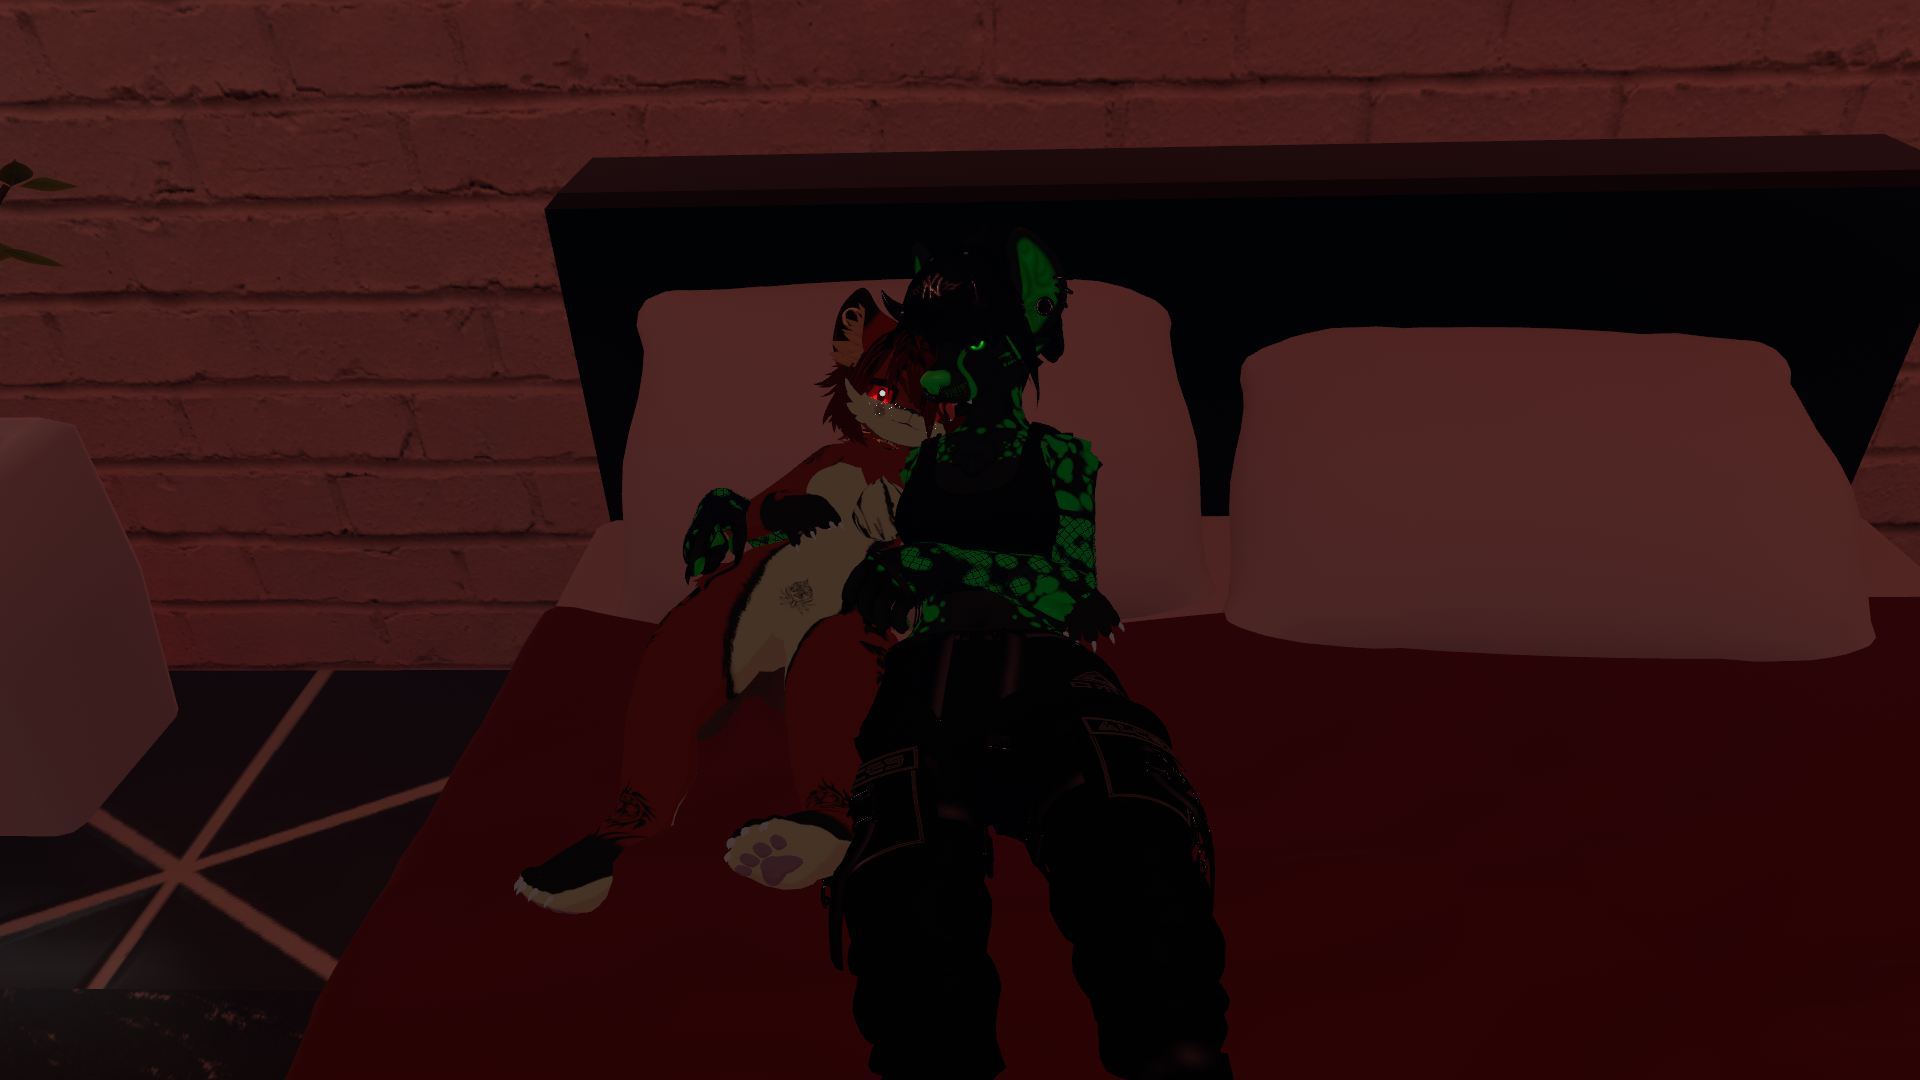 Two VR avatars snuggle on a bed